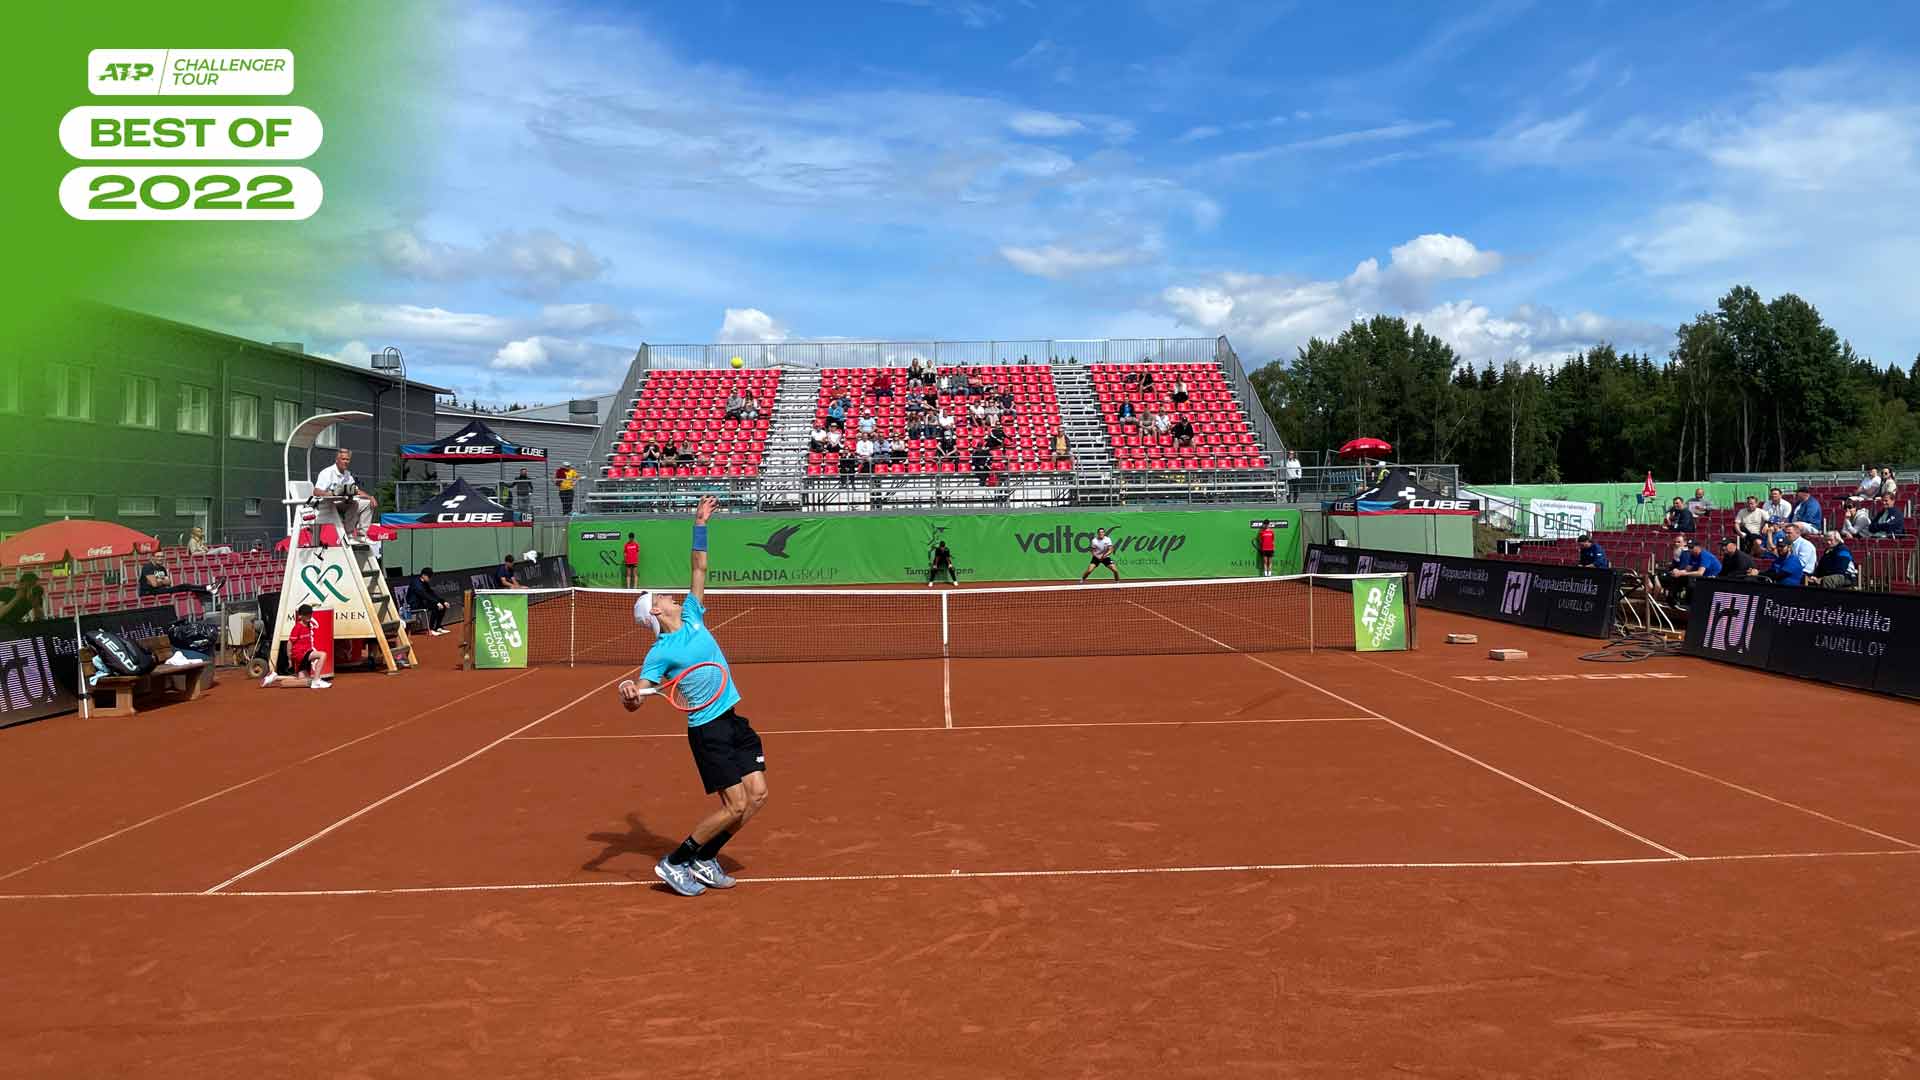 Water Covers 71 Of Earth; ATP Challenger Tour Covers The Rest ATP